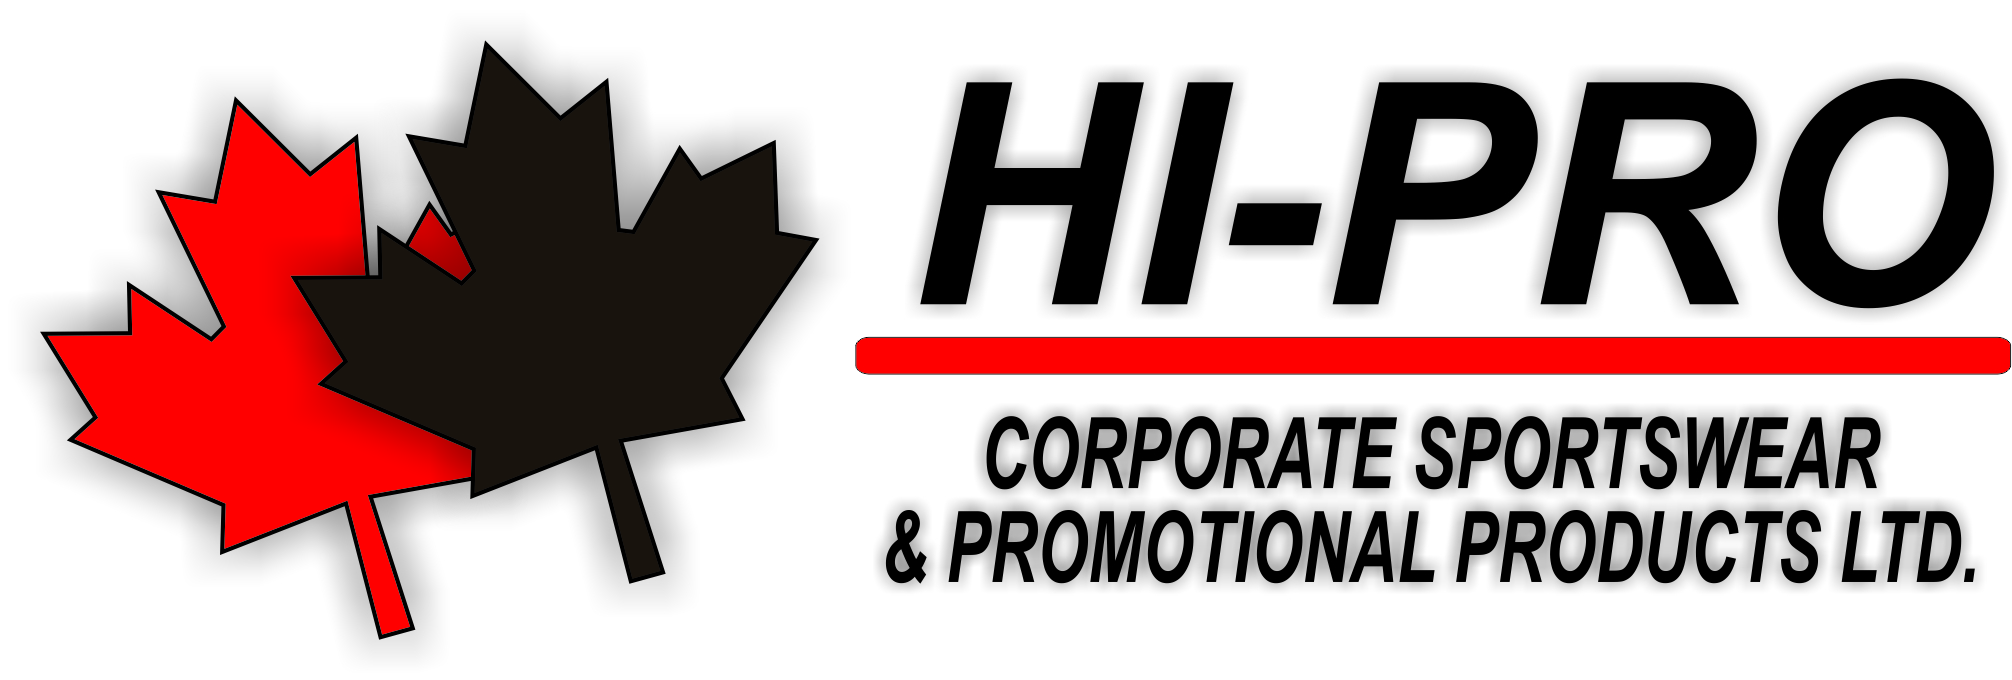 Hi Pro Corporate Sportswear and Promotional Products Ltd